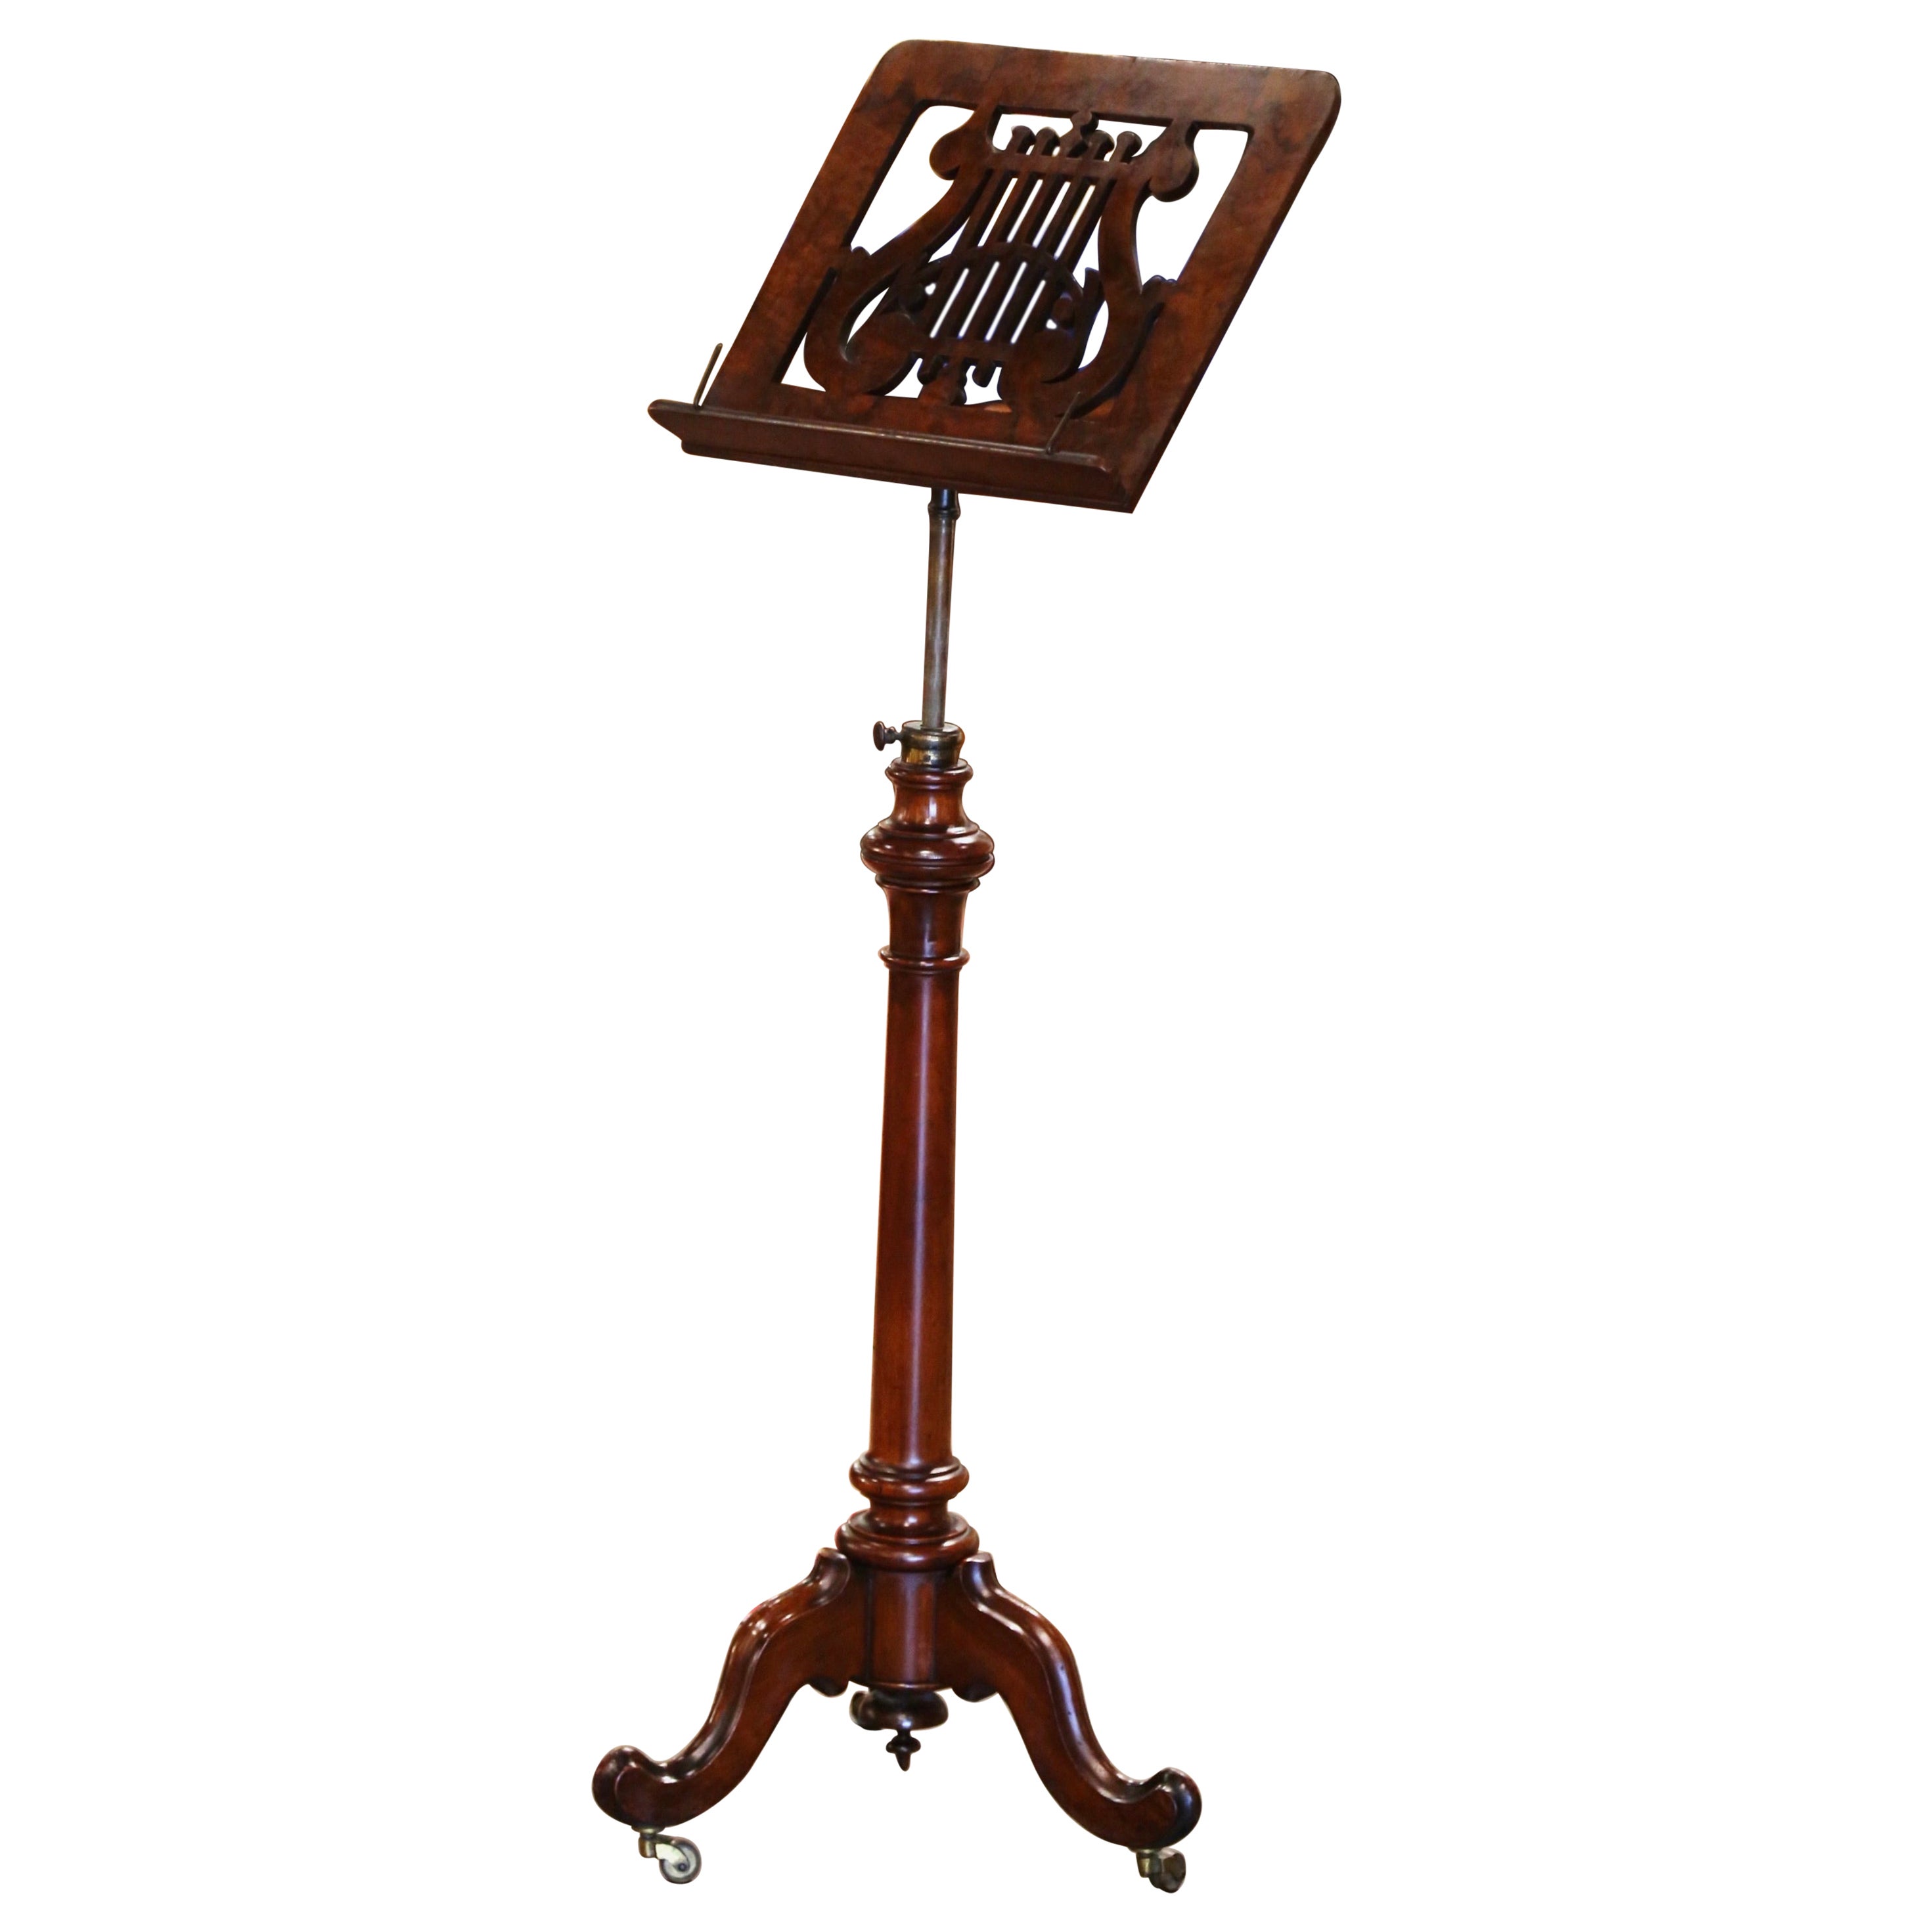 19th-Century English Mahogany Music Stand on Wheels with Pierced Lyre Motif